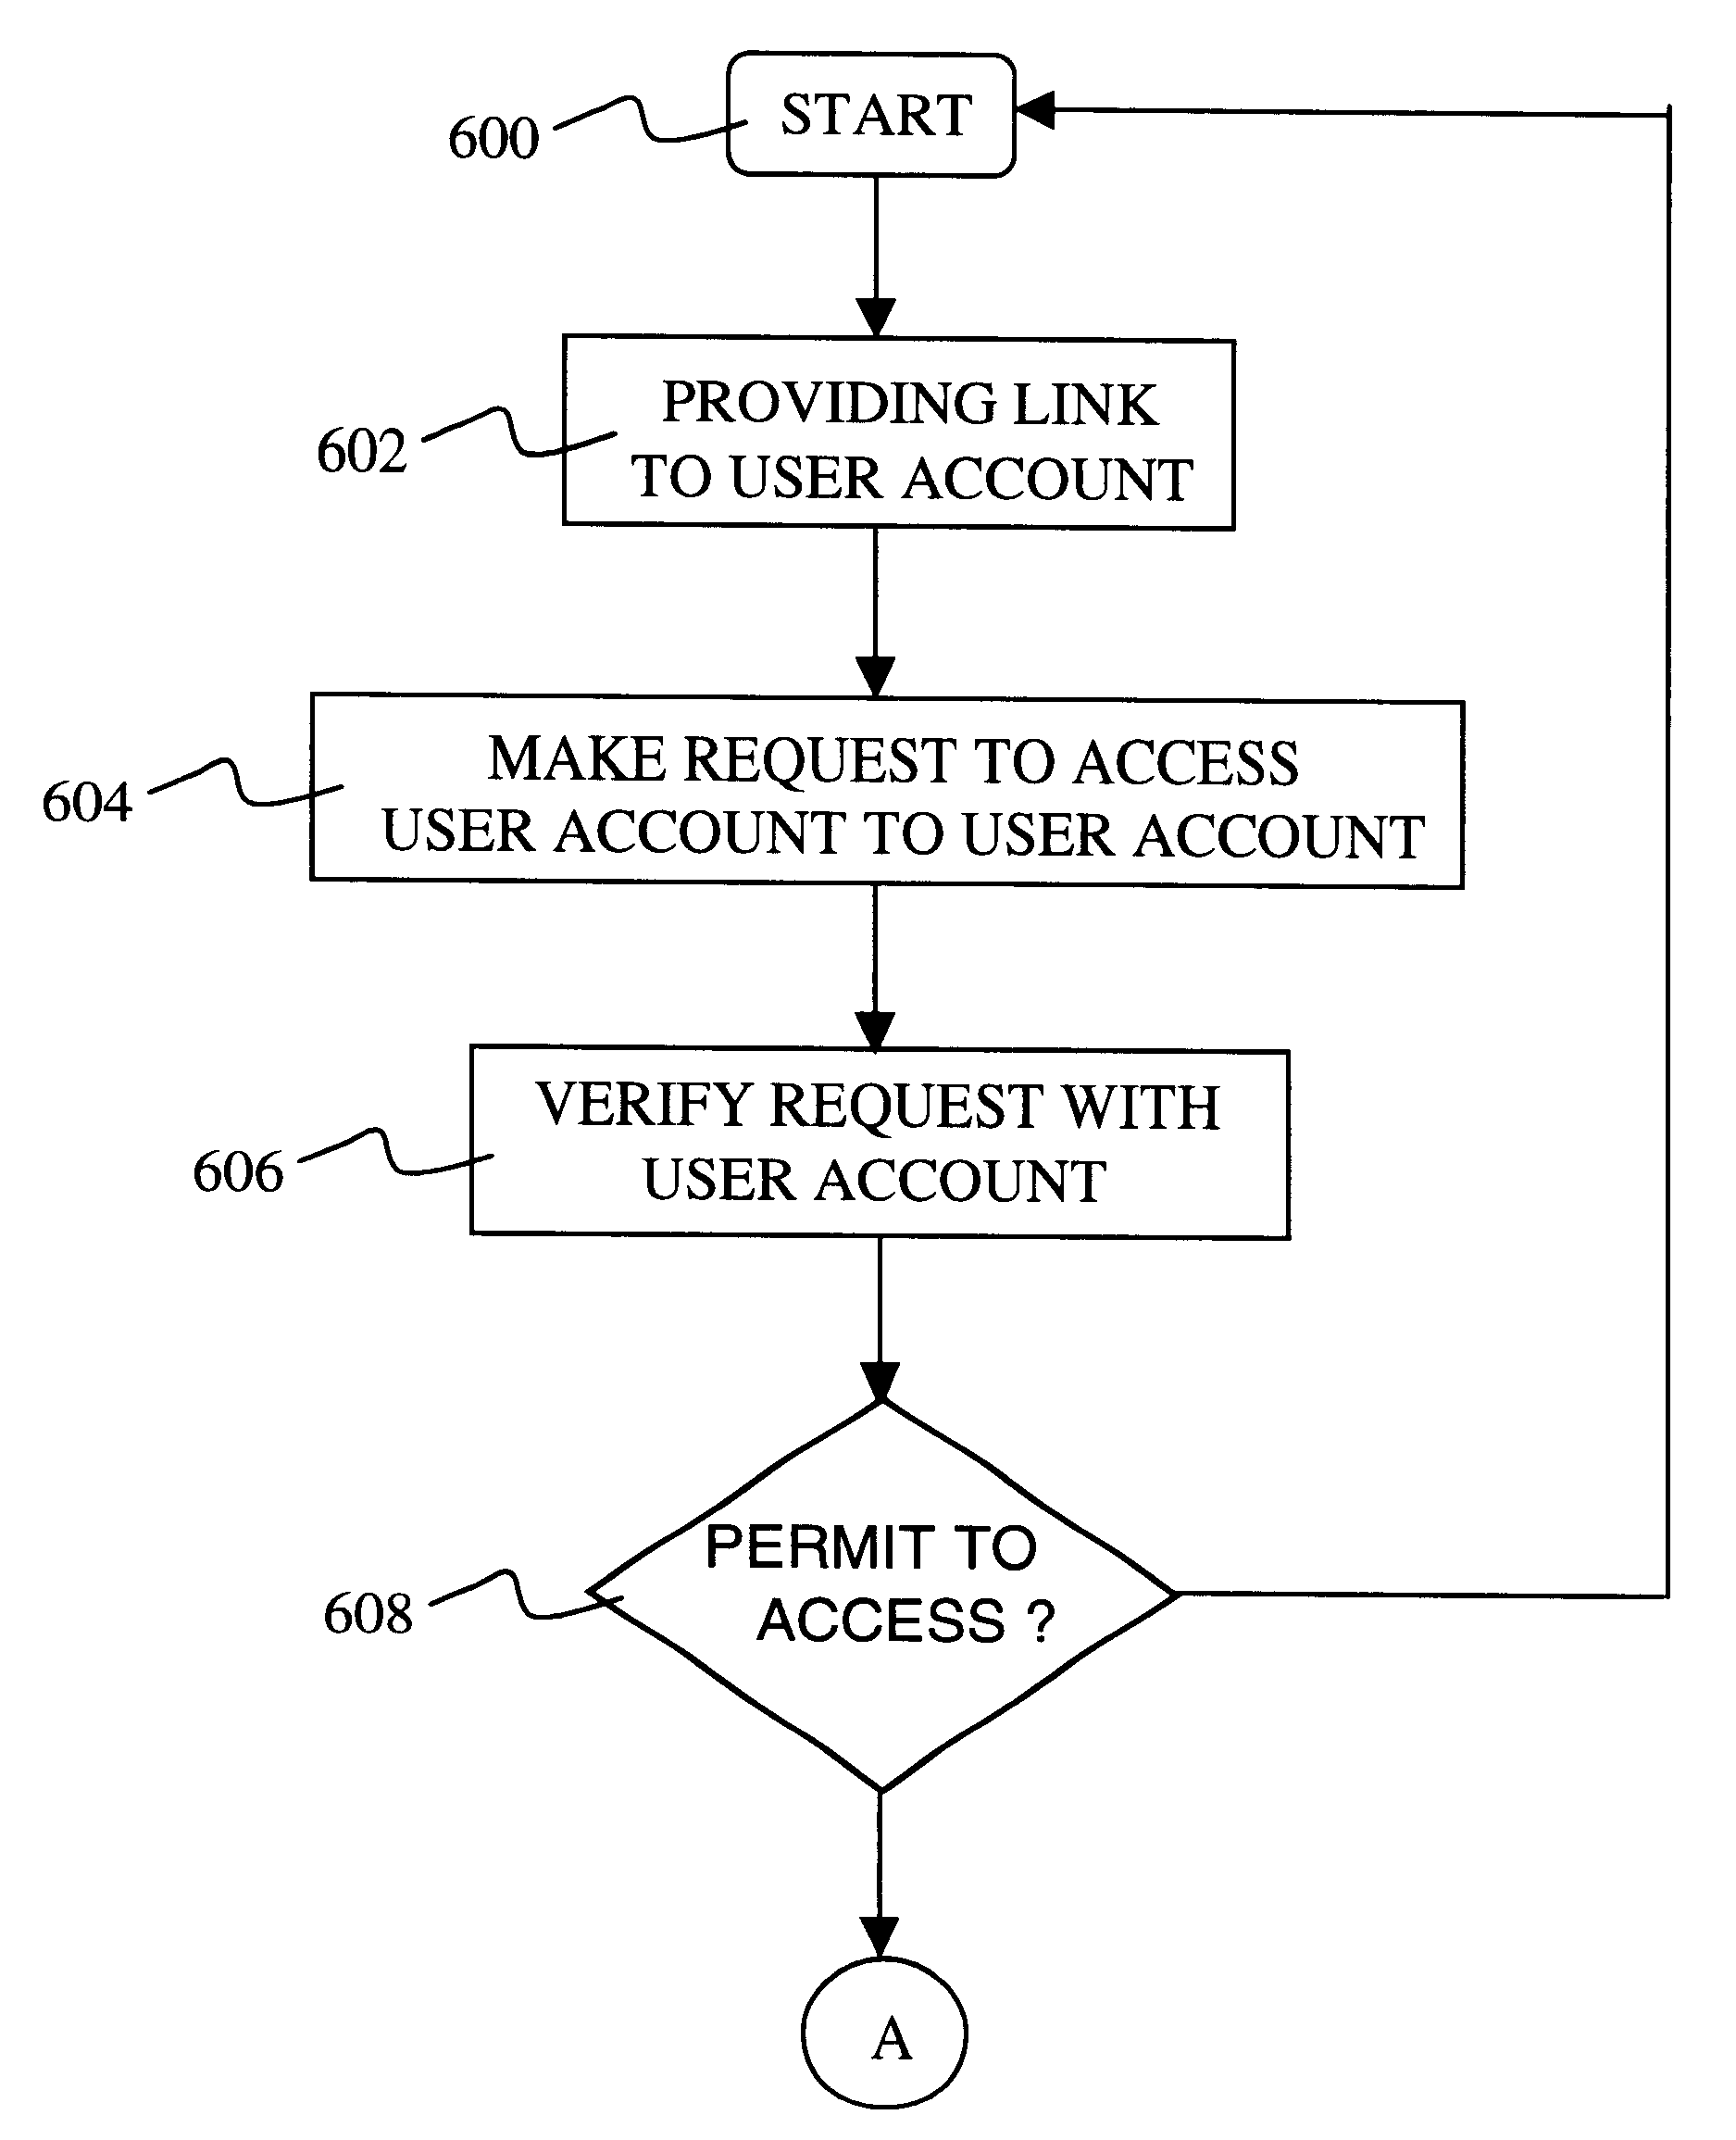 Visual interface to mobile subscriber account services